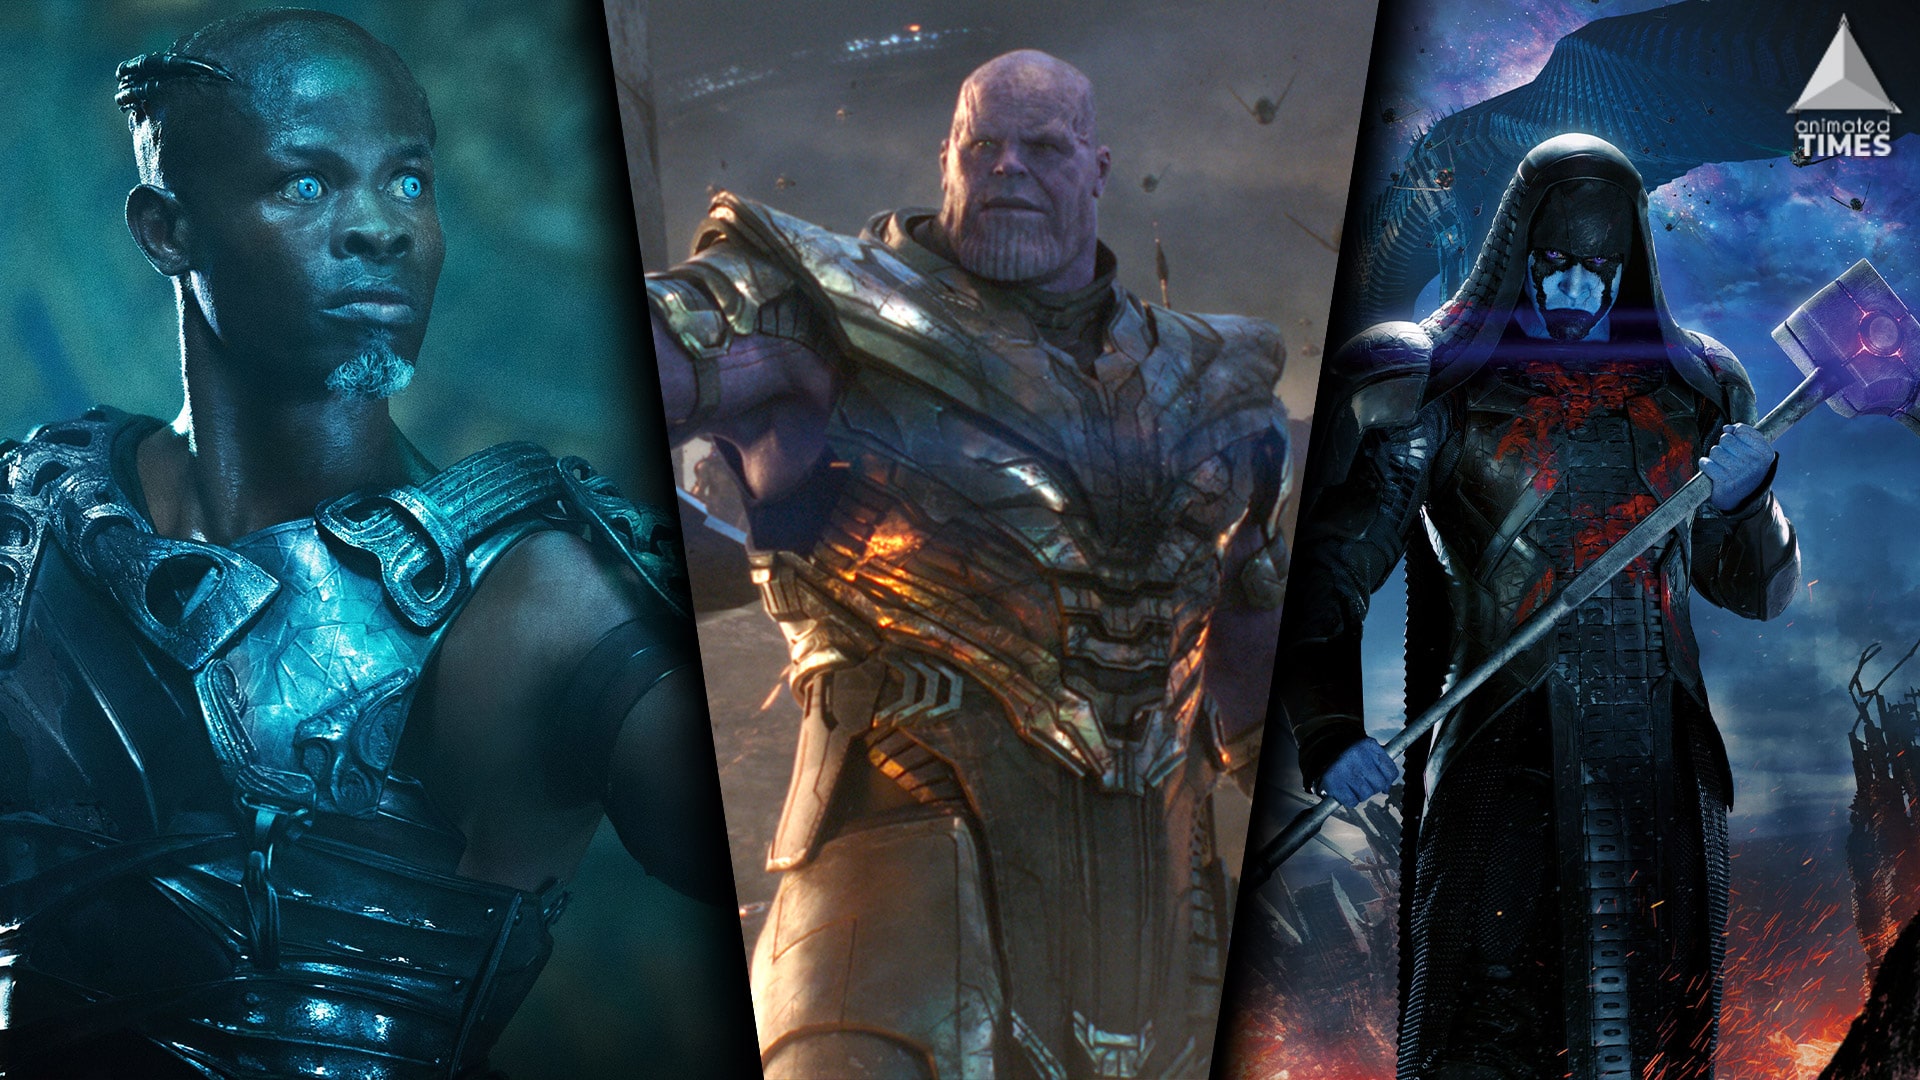 Avengers: Endgame – Thanos Did Not Bring Two Key Villains in the Final Battle